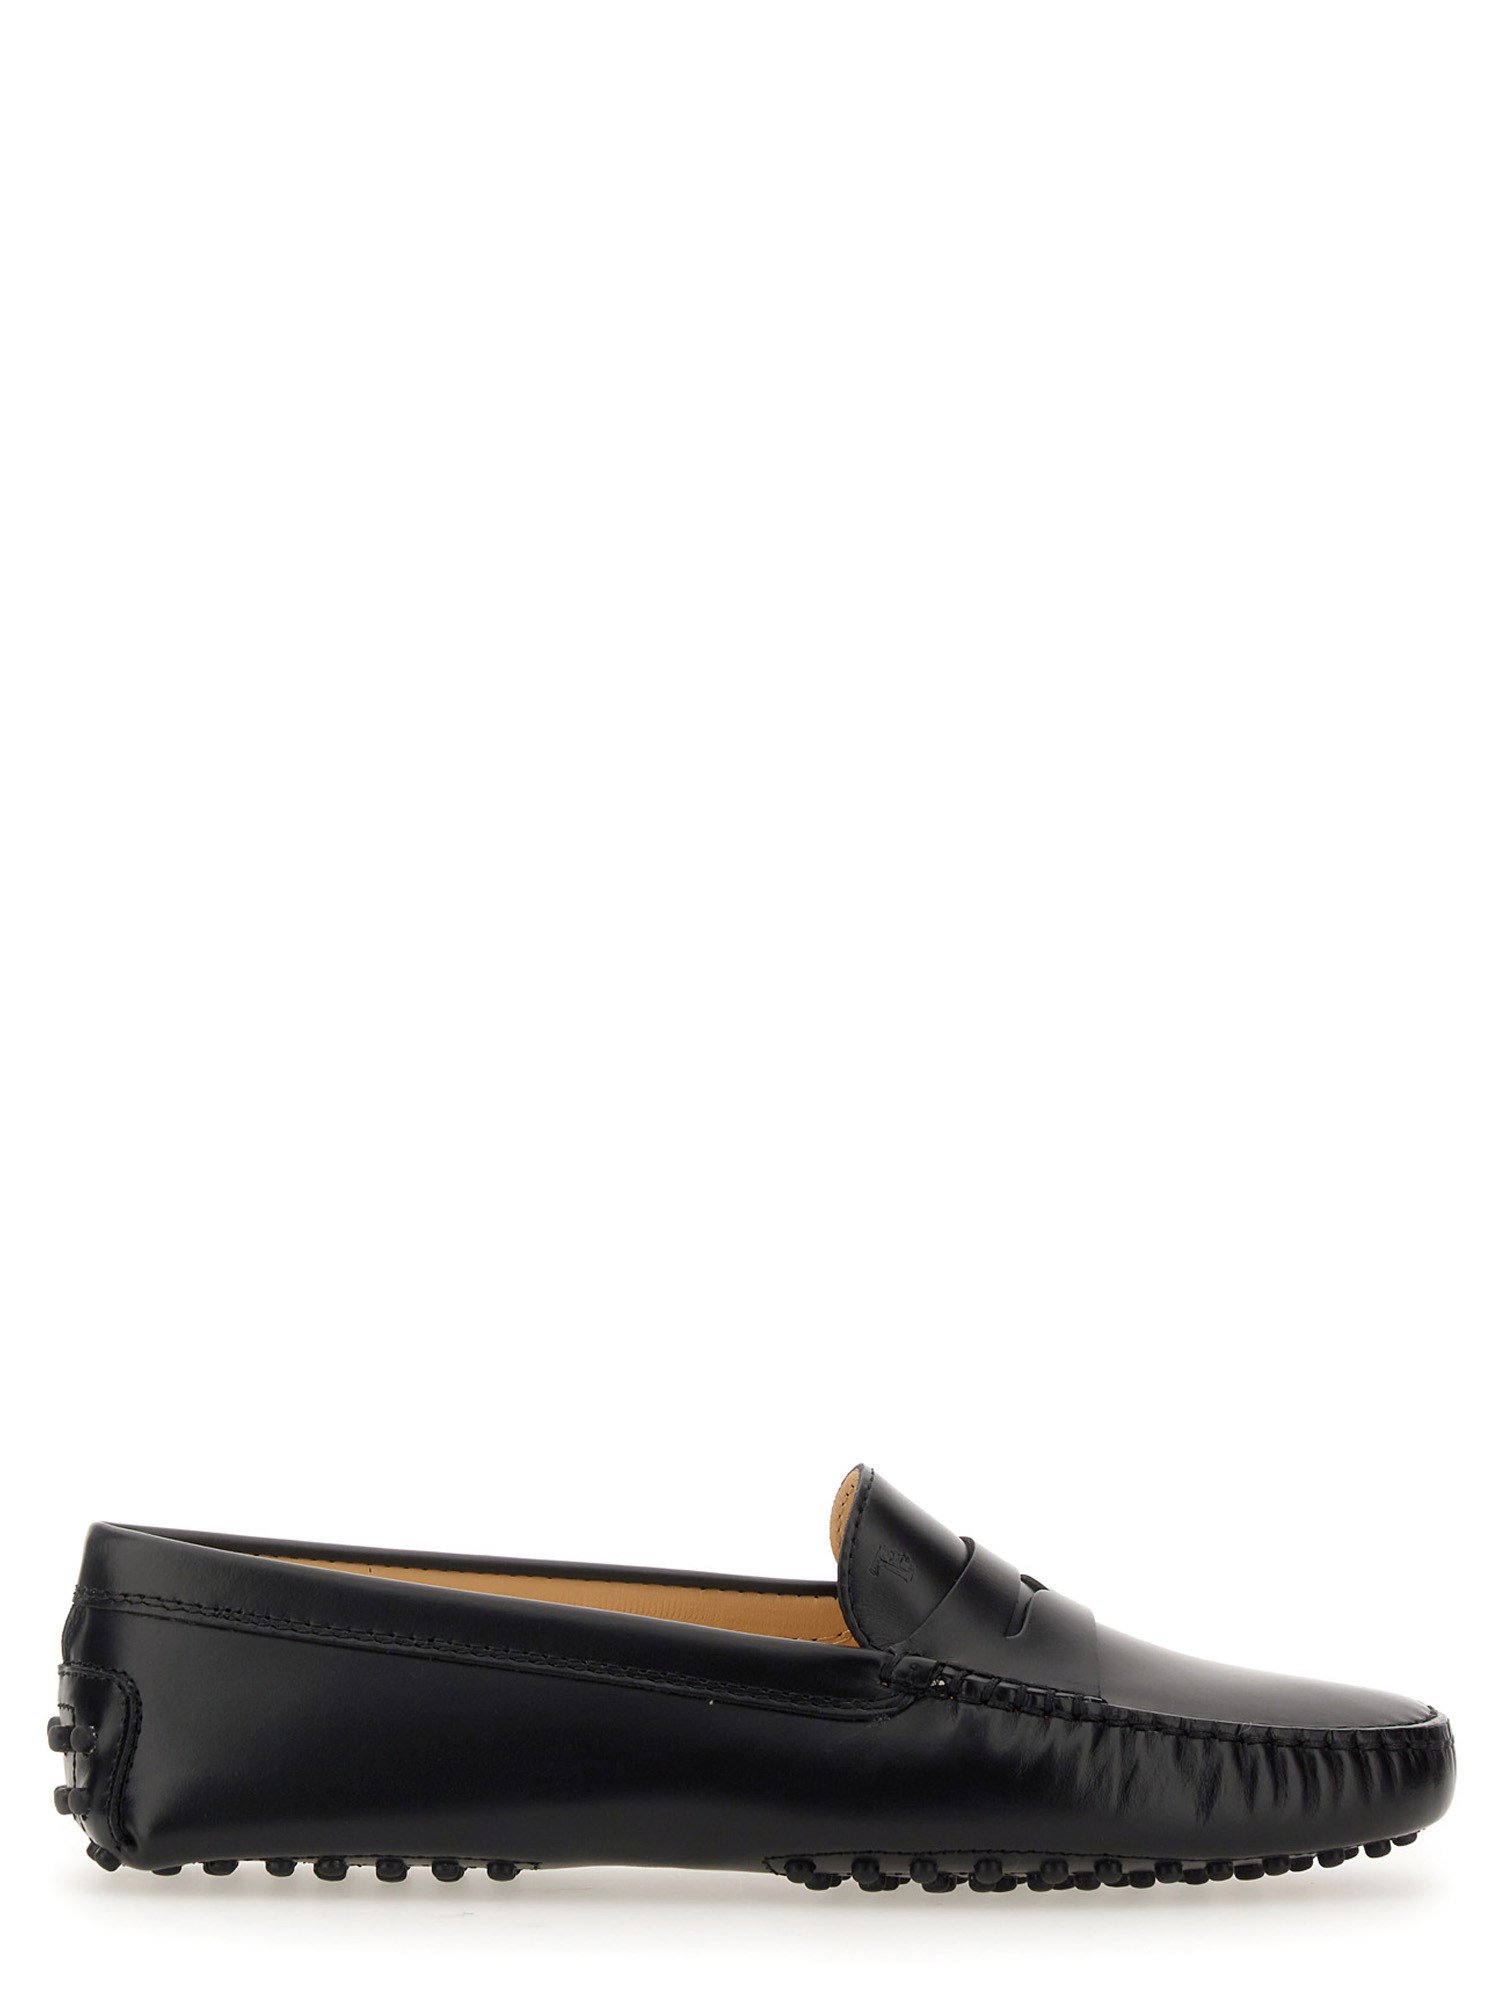 tod's rubberized loafer 